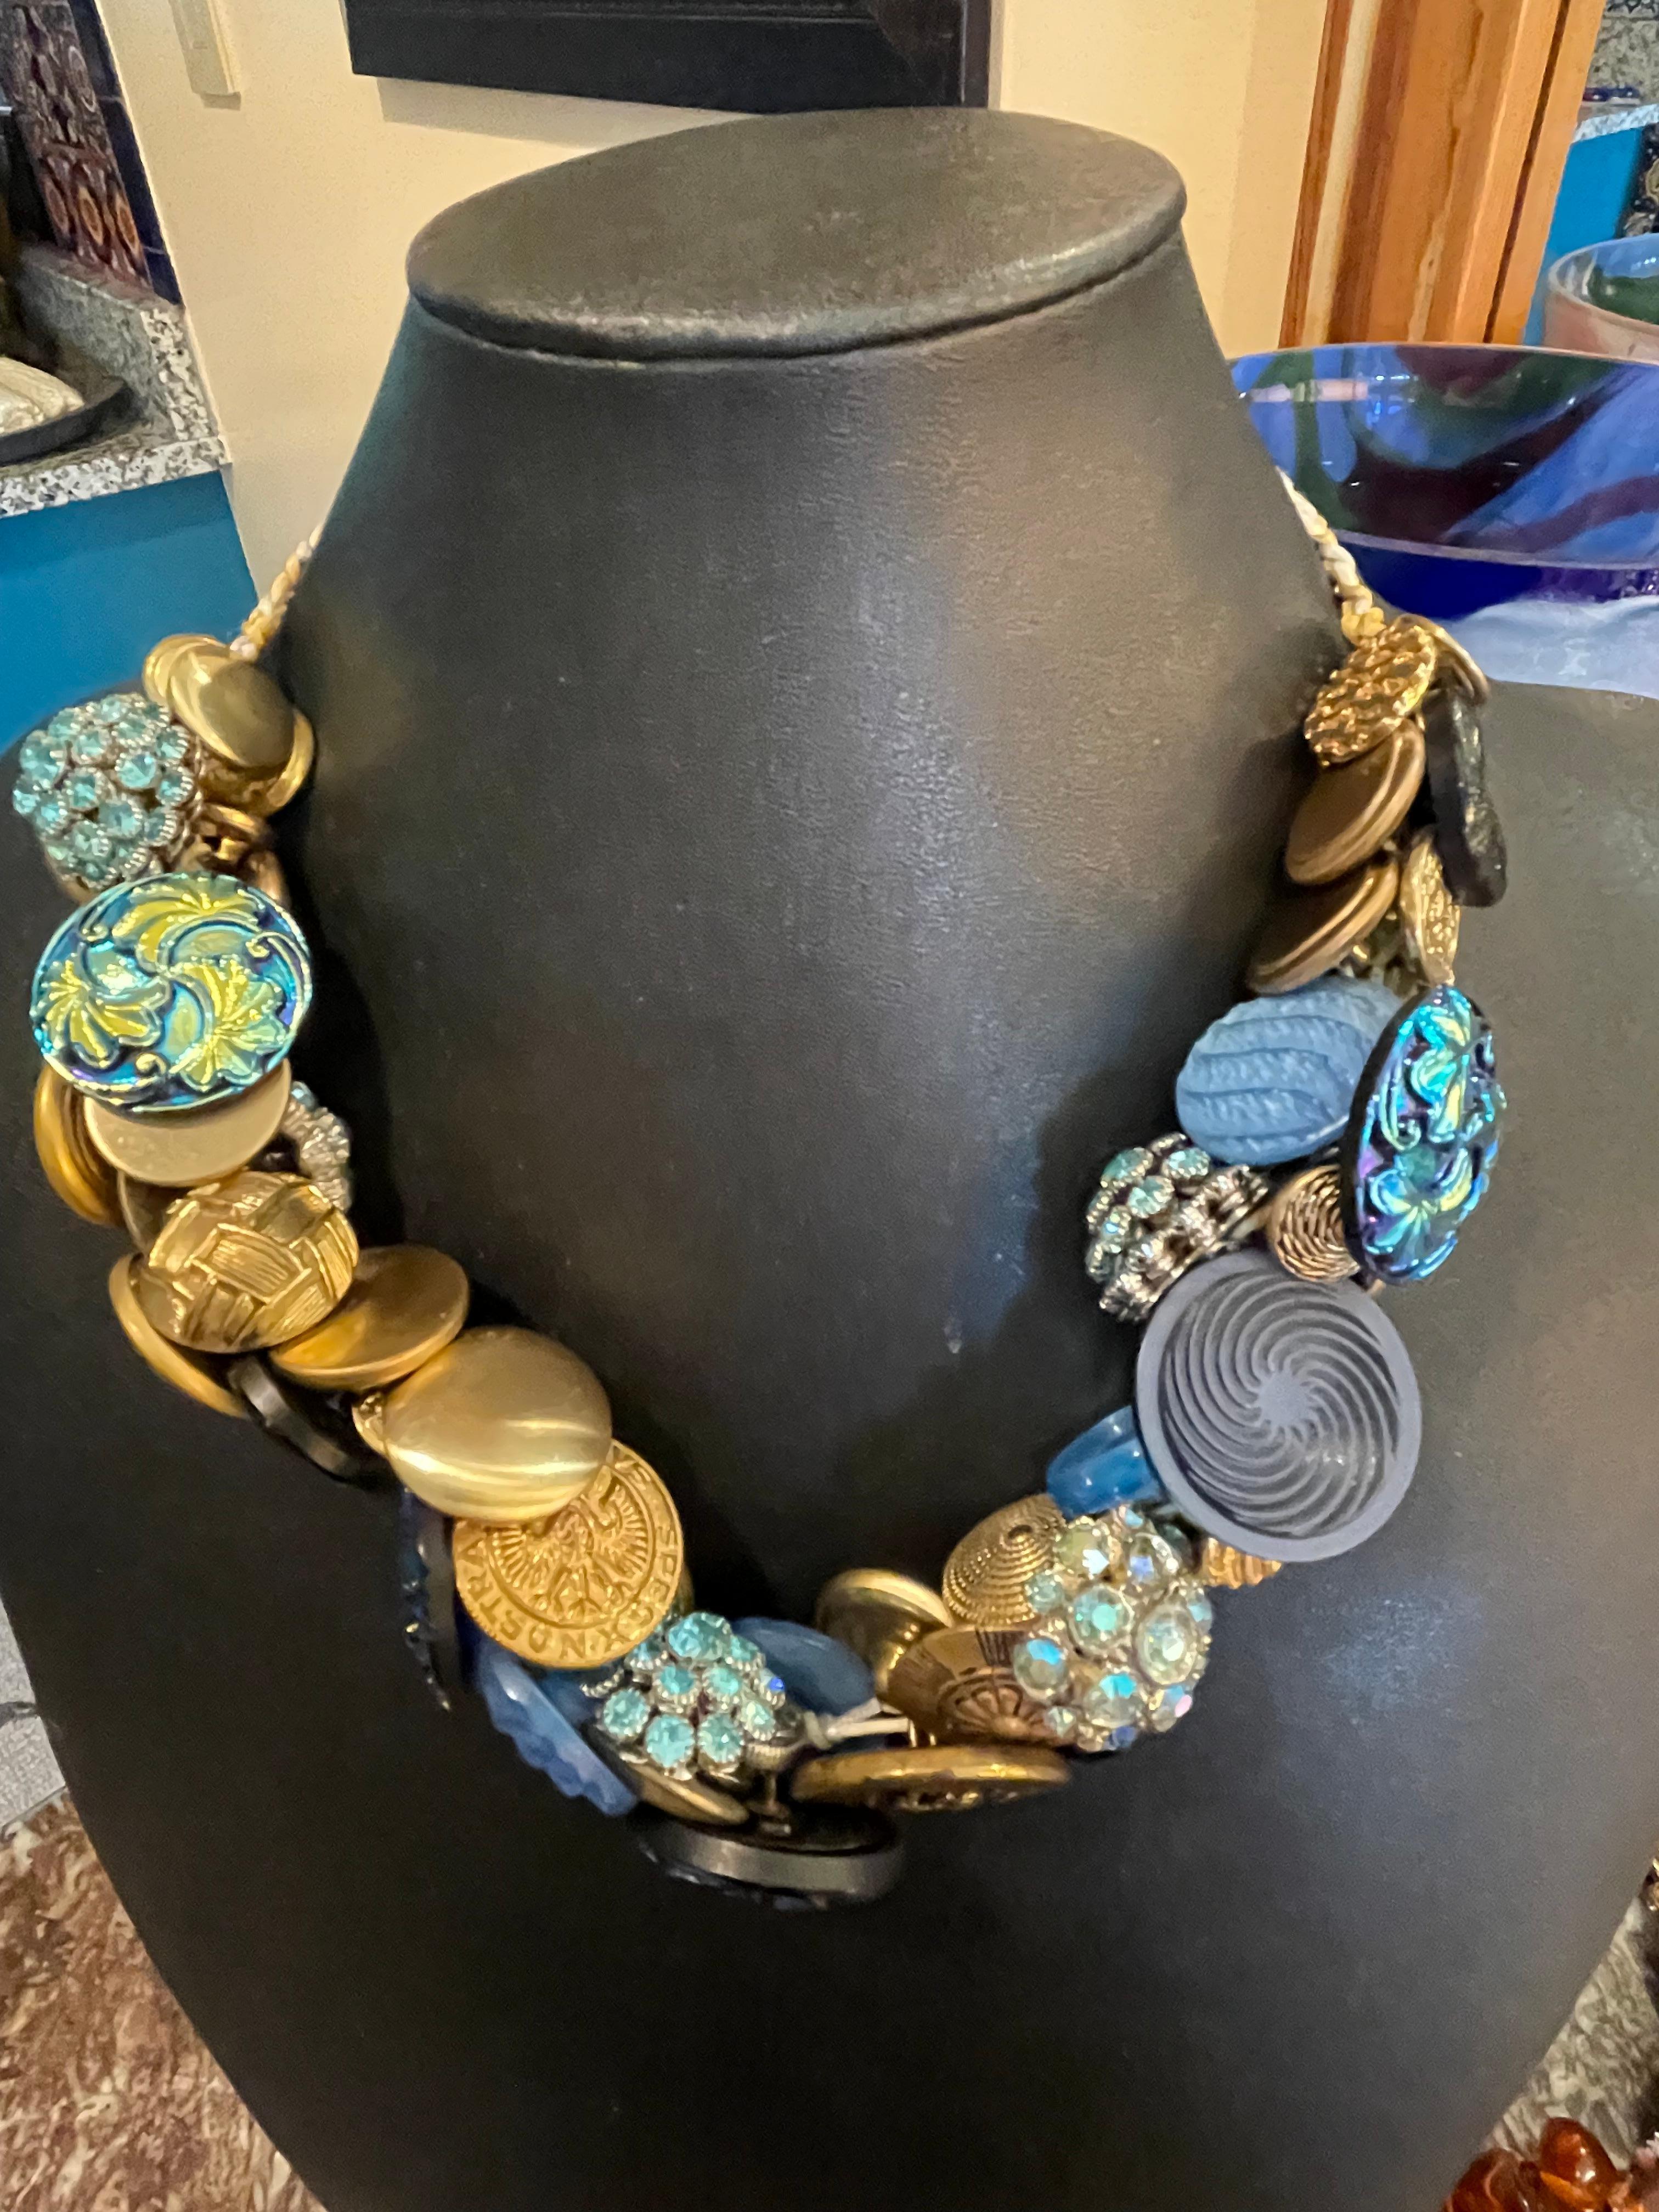 Lorraine’s Bijoux offers a Stunning Antique Czech Glass and Brass Buttons creation on a three dimensional, Adjustable necklace. This one of a kind,  Handmade, totally unique piece is a stunning and very unusual addition to any wardrobe. The amazing